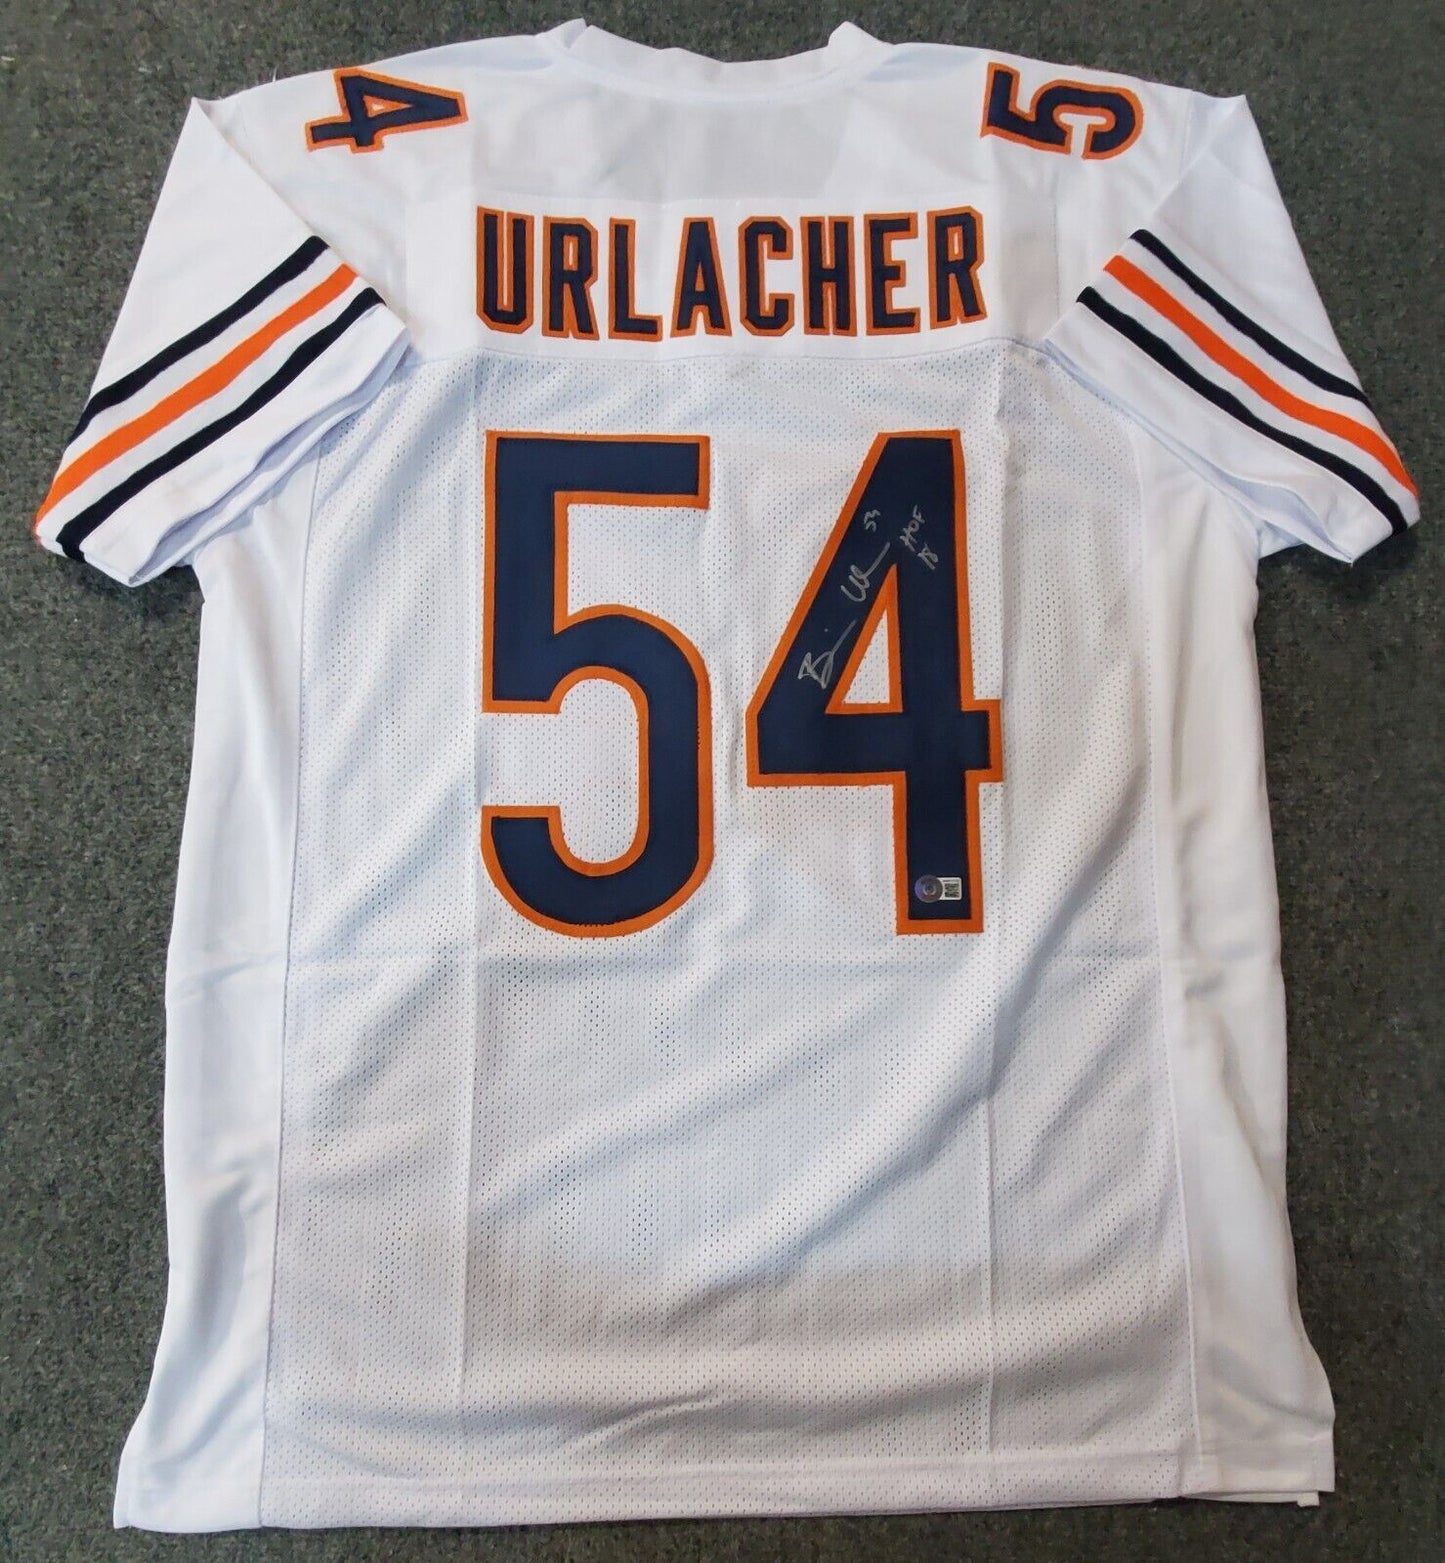 MVP Authentics Chicago Bears Brian Urlacher Autographed Signed Inscribed Jersey Beckett Holo 180 sports jersey framing , jersey framing